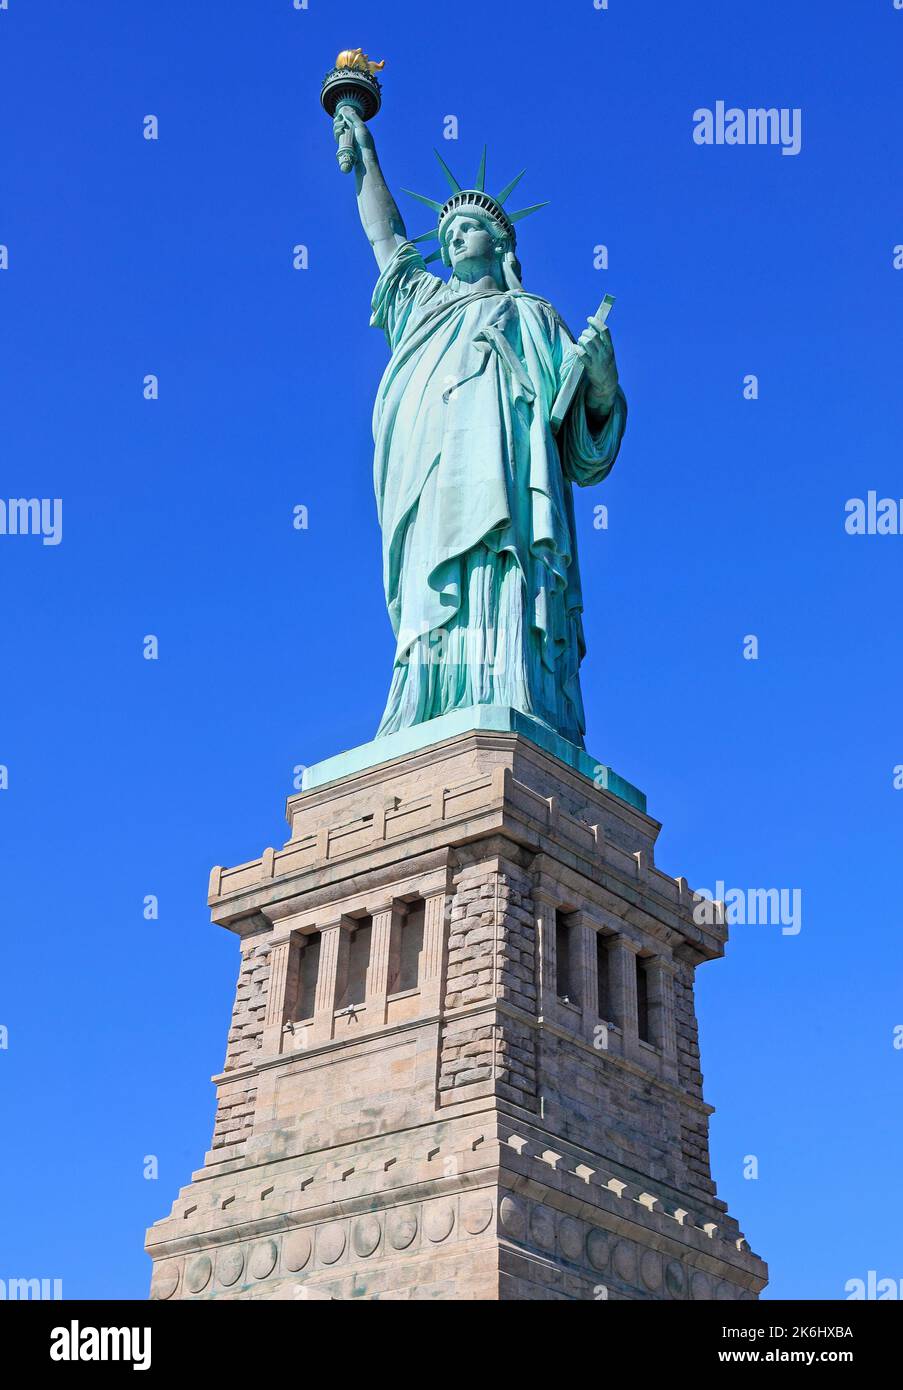 Statue of Liberty, New York City, USA. Includes a part of the base the stature is on Stock Photo